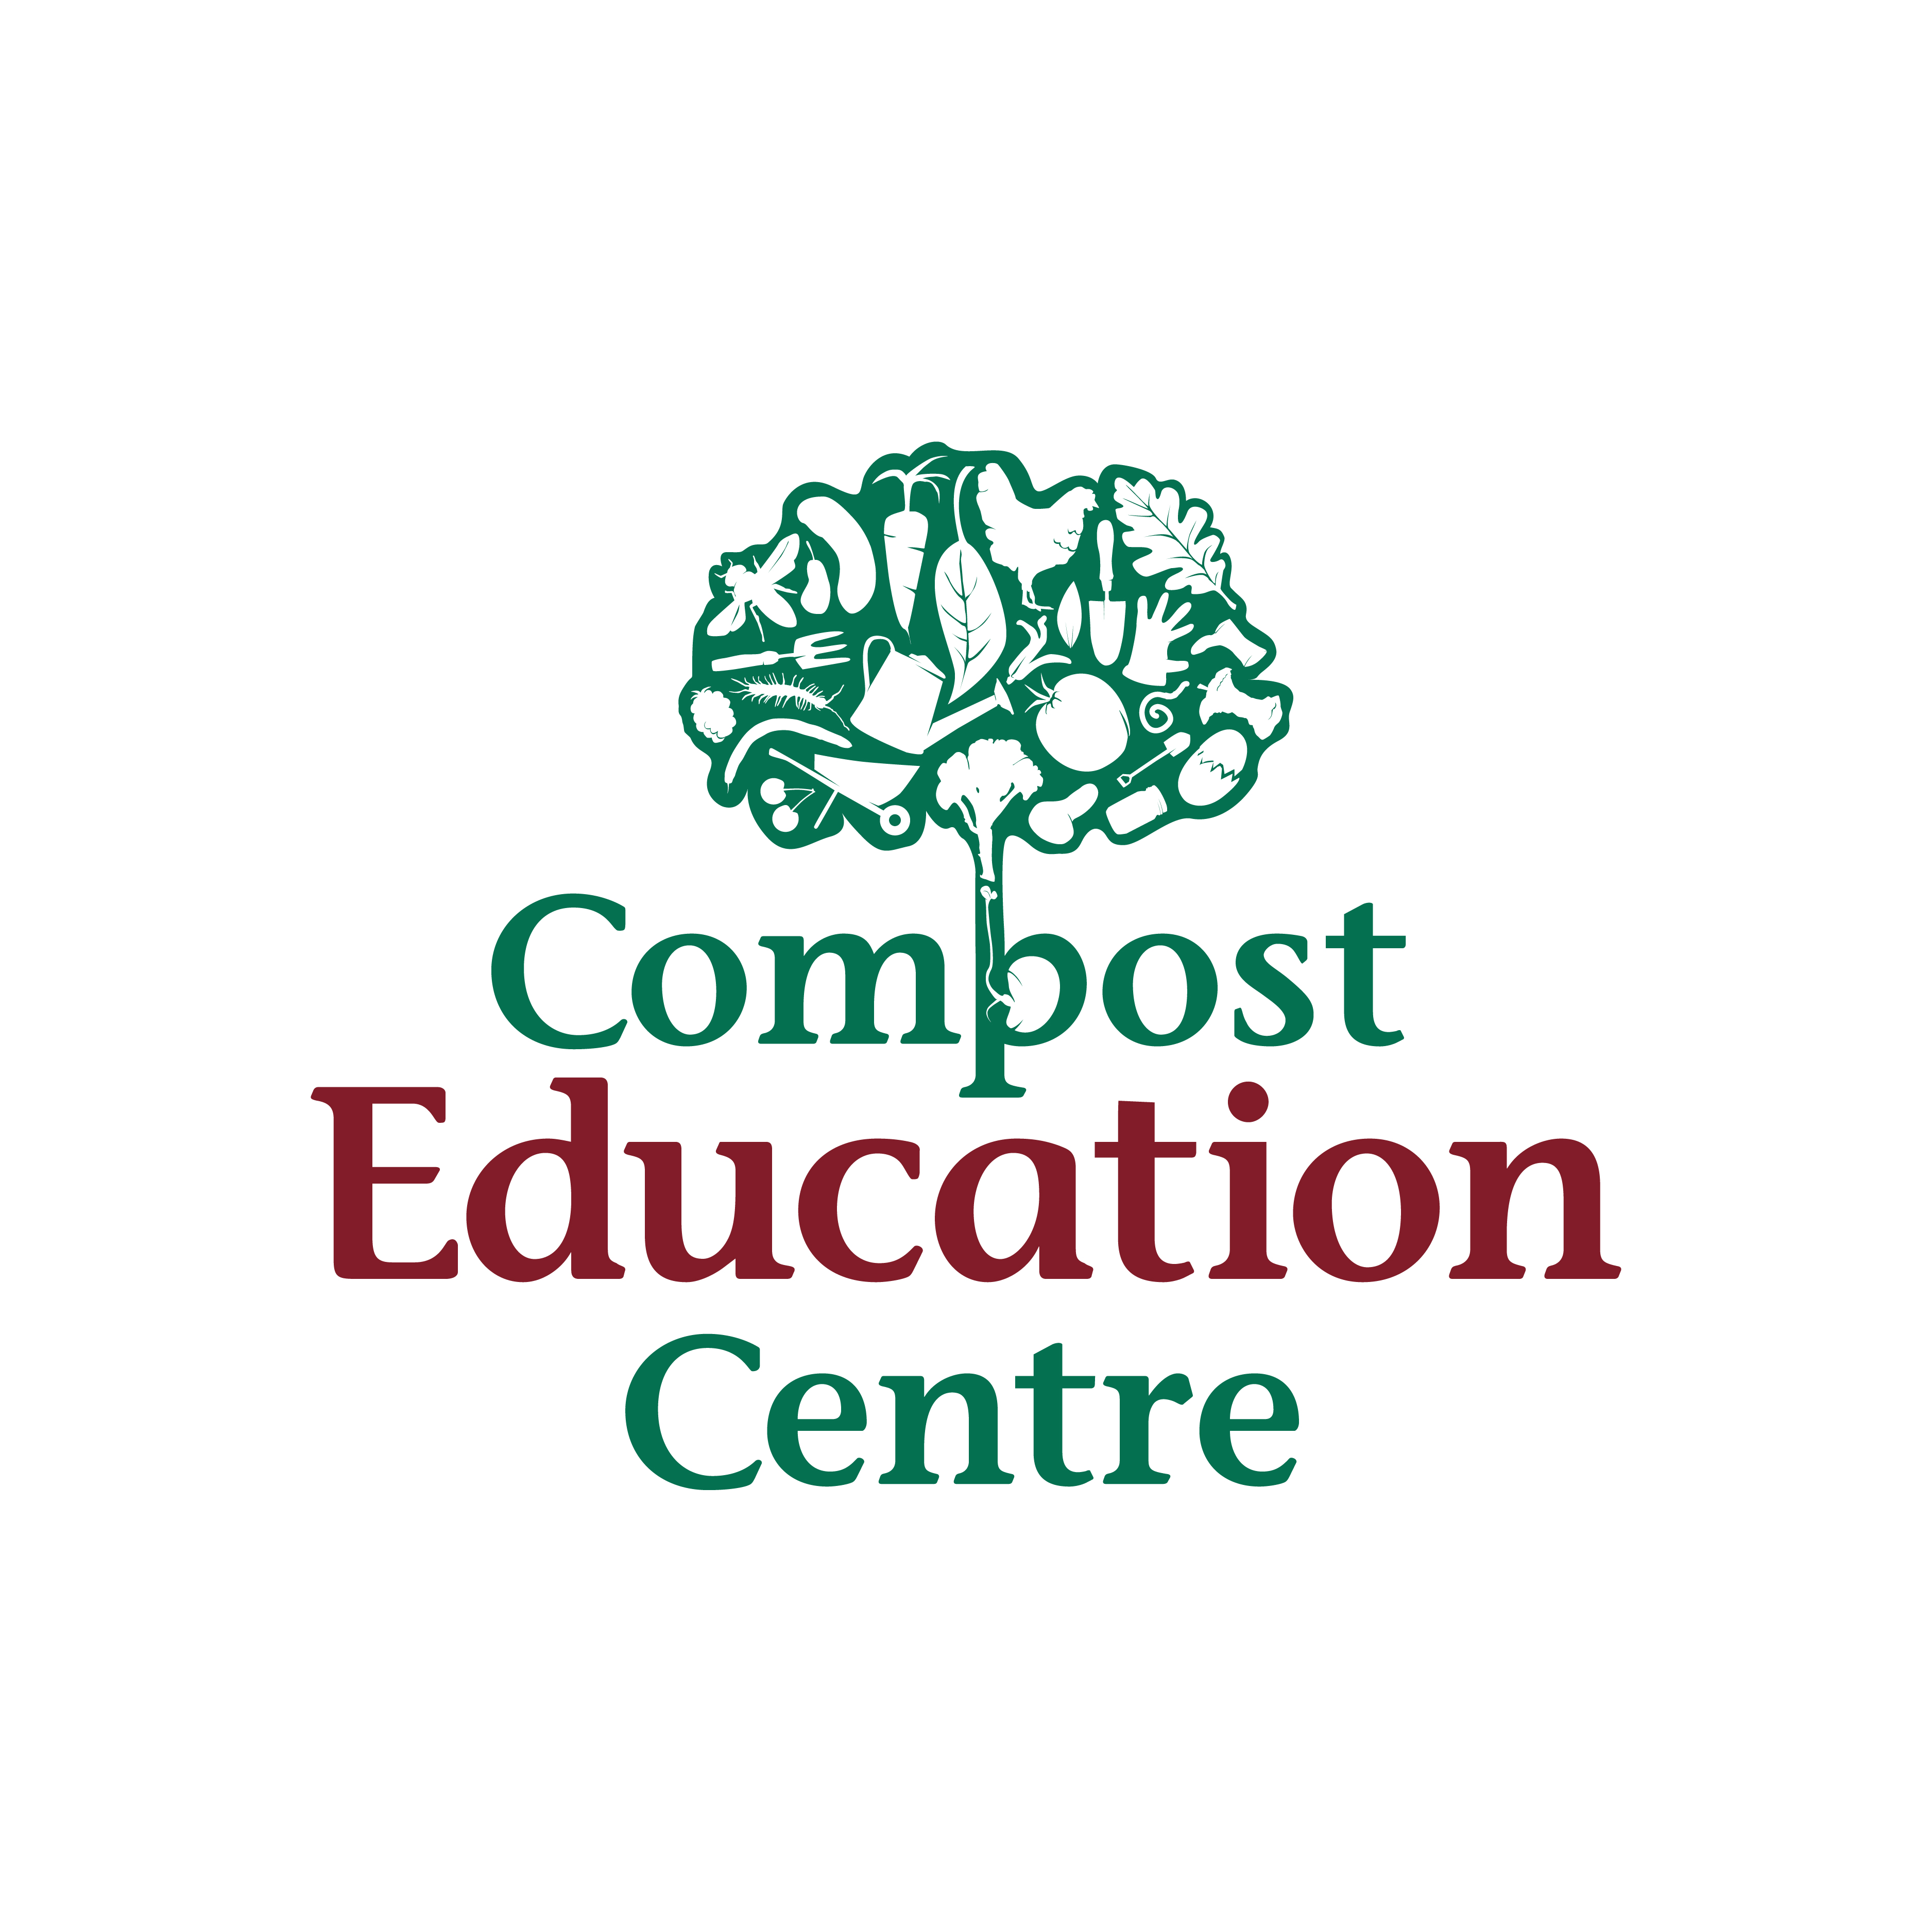 Compost Education Centre logo design by logo designer Simeon Goa for your inspiration and for the worlds largest logo competition